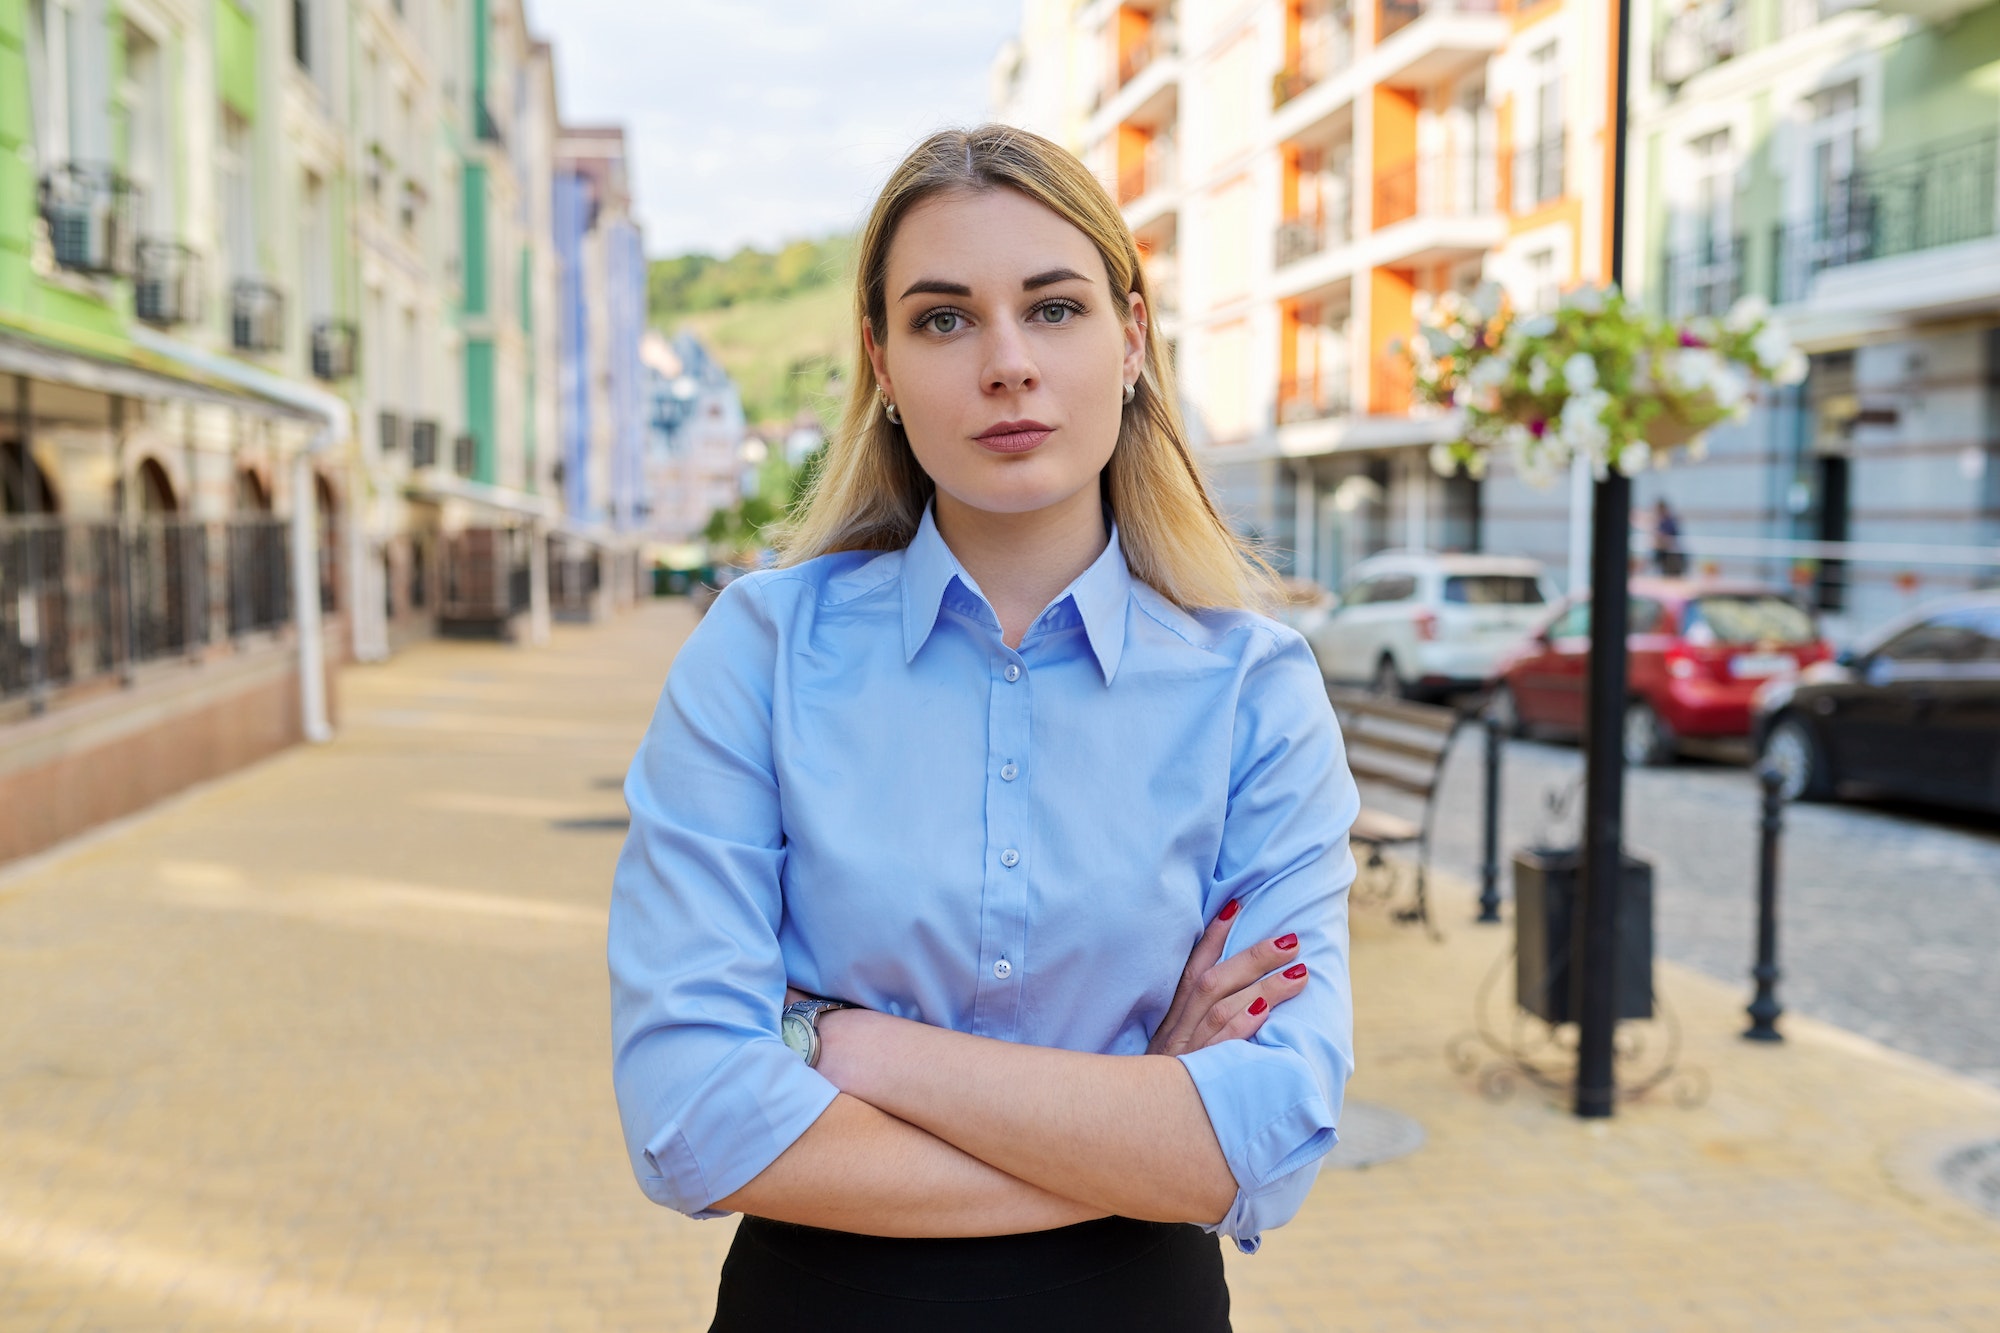 Outdoor portrait of young confident business woman with crossed arms